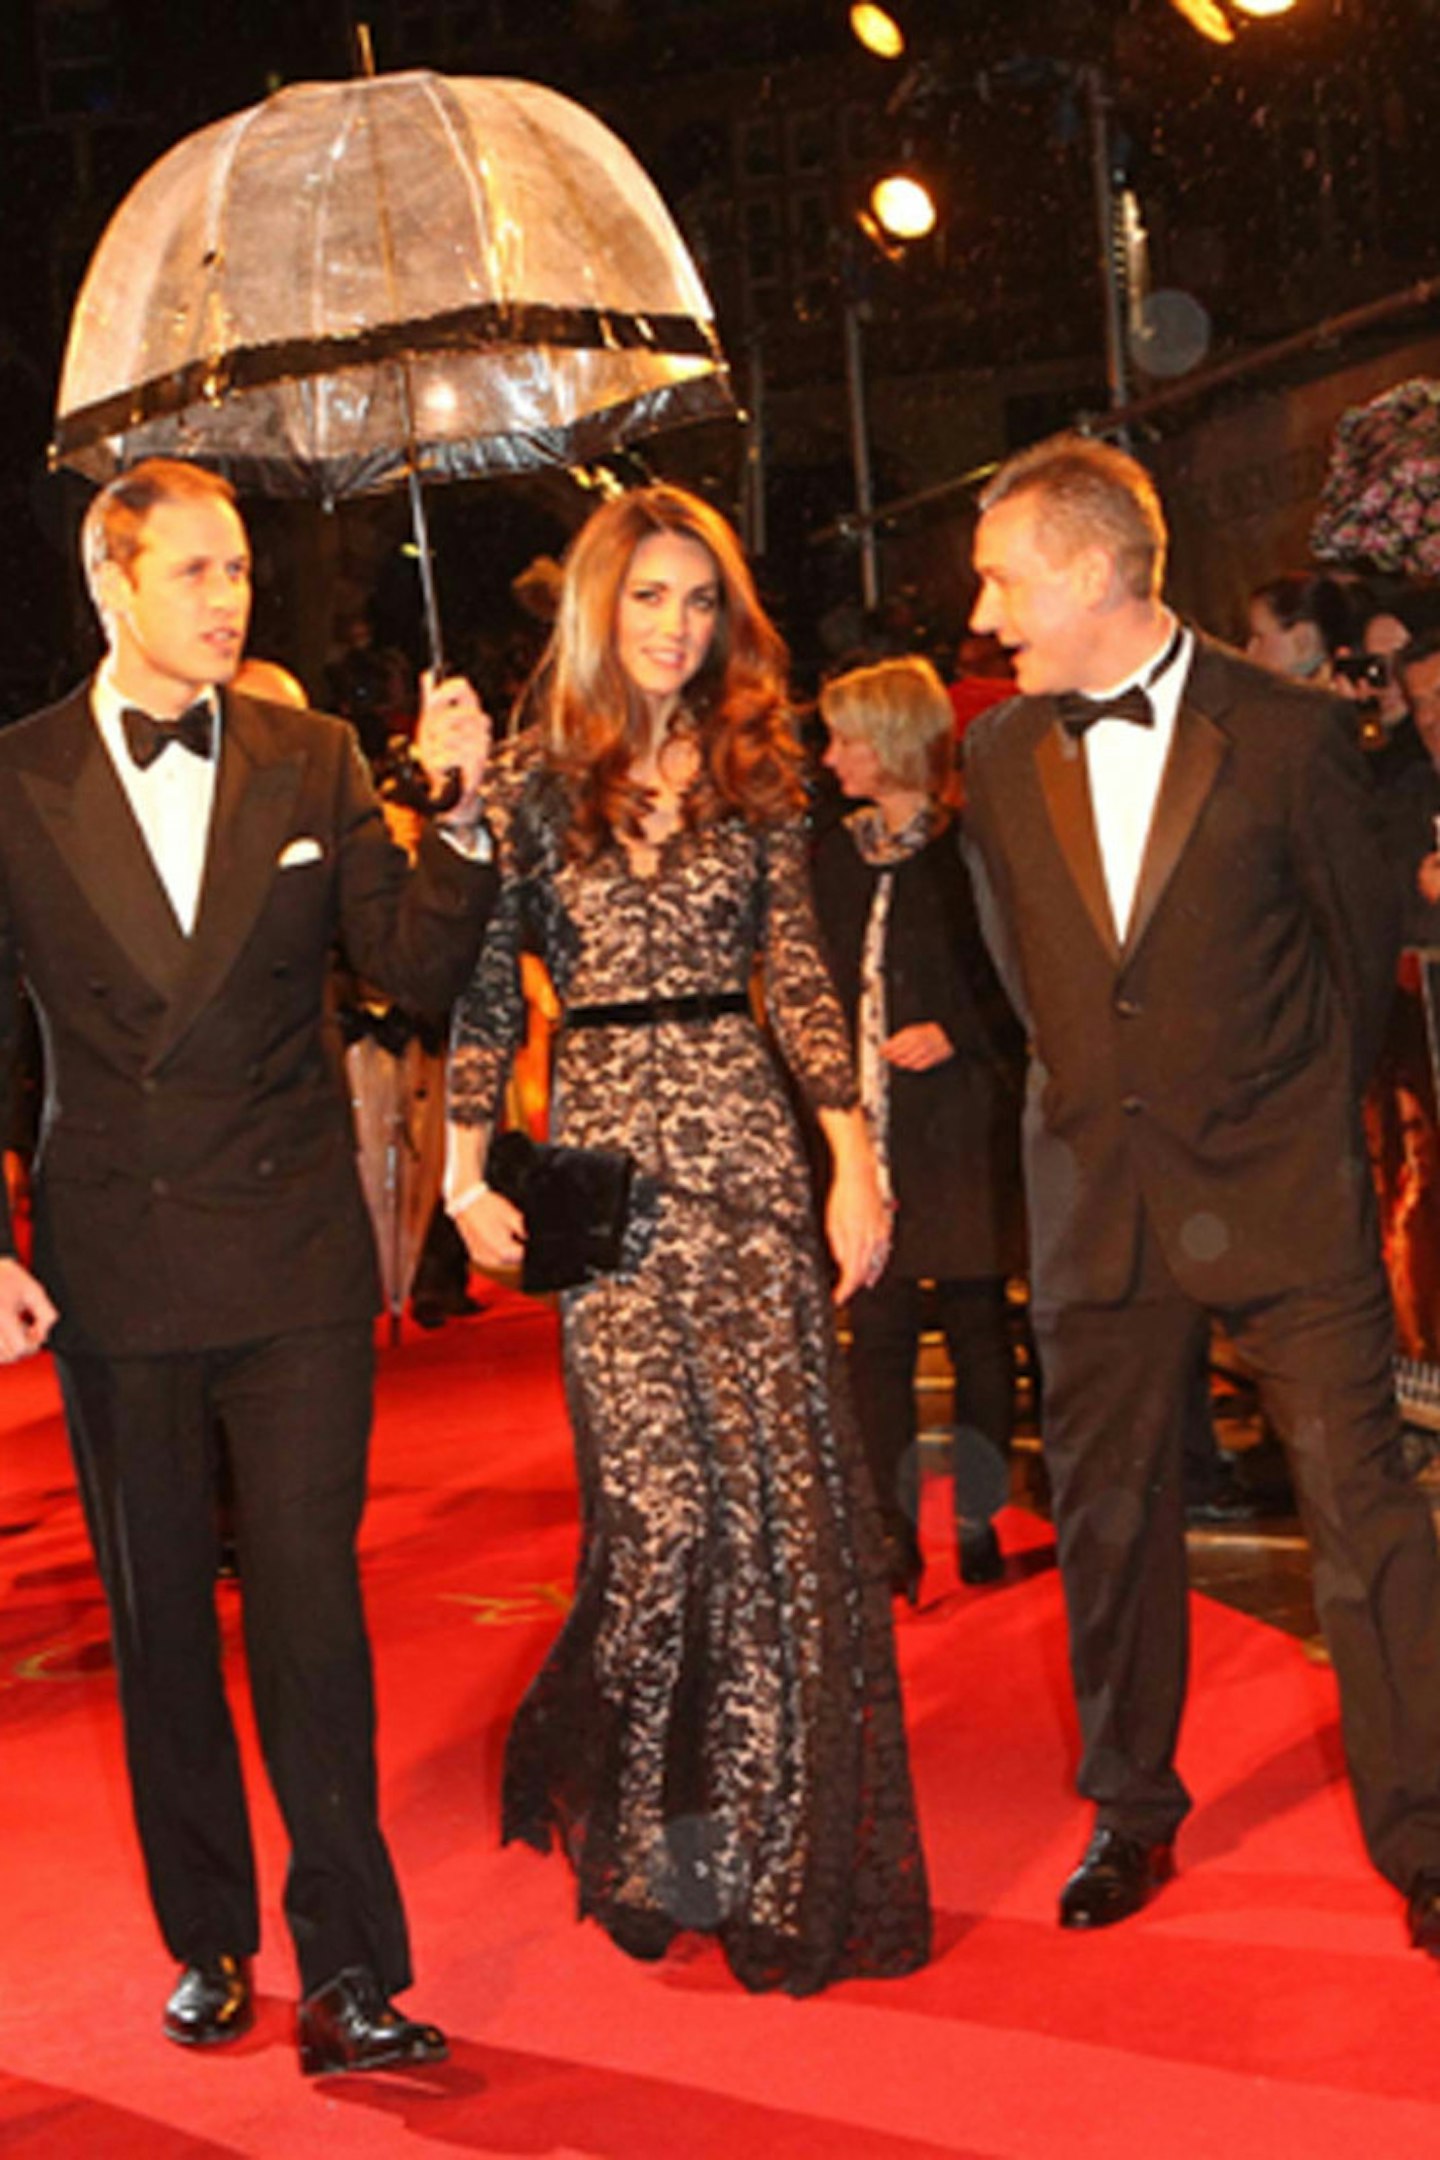 17-16. Walking the red carpet in January 2012